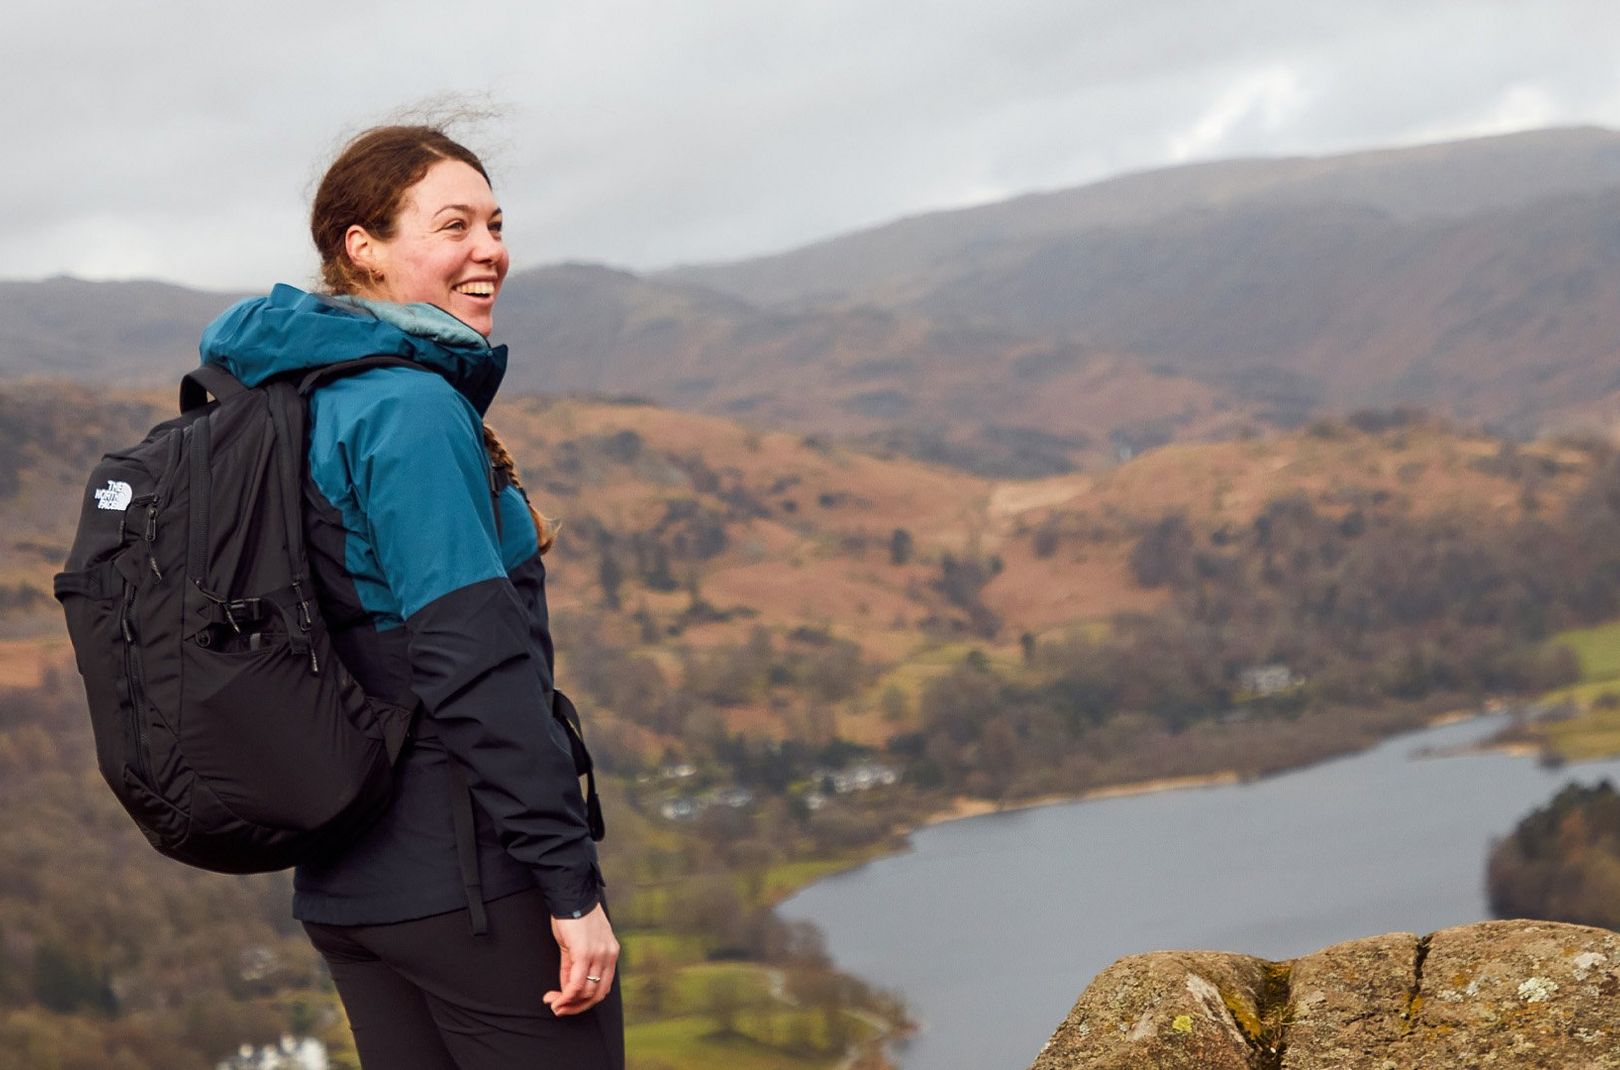 Elise downing in The lake District